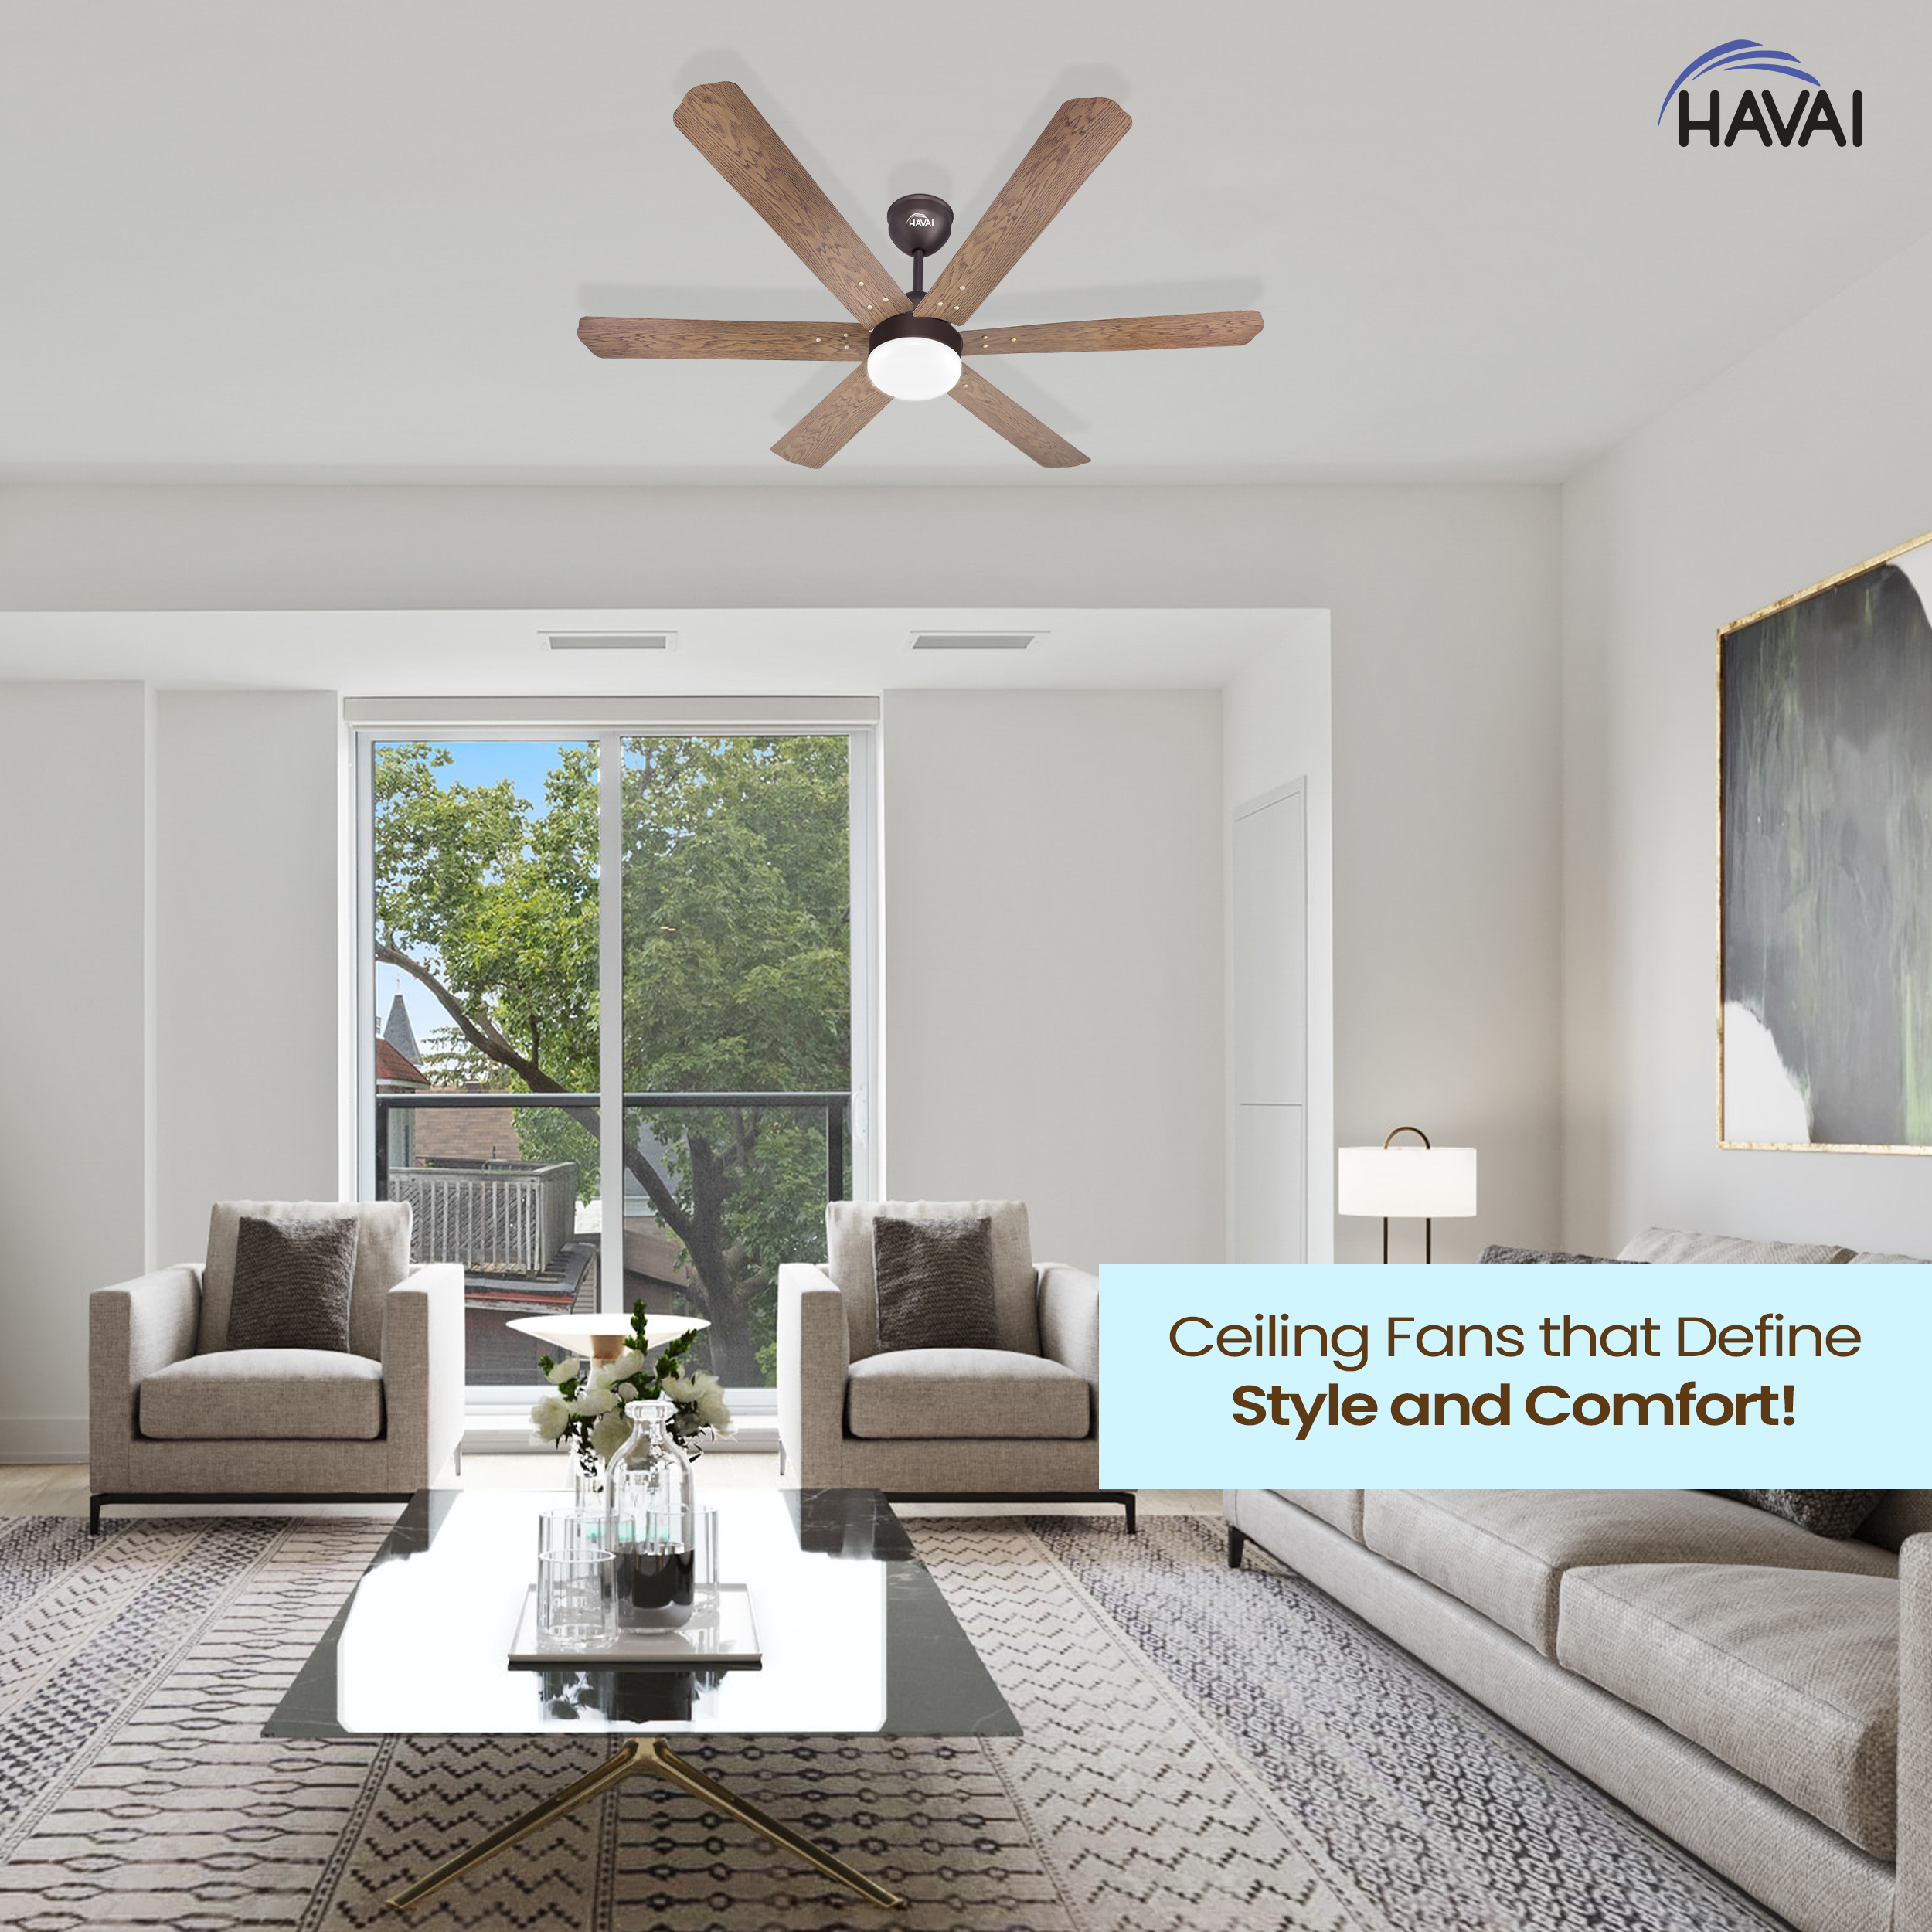 HAVAI Pristine Wooden Range BLDC Ceiling Fan - 6 Blades - 35W, Ashwood 1200mm Blade with Remote (WHITE 0.5 LED)…